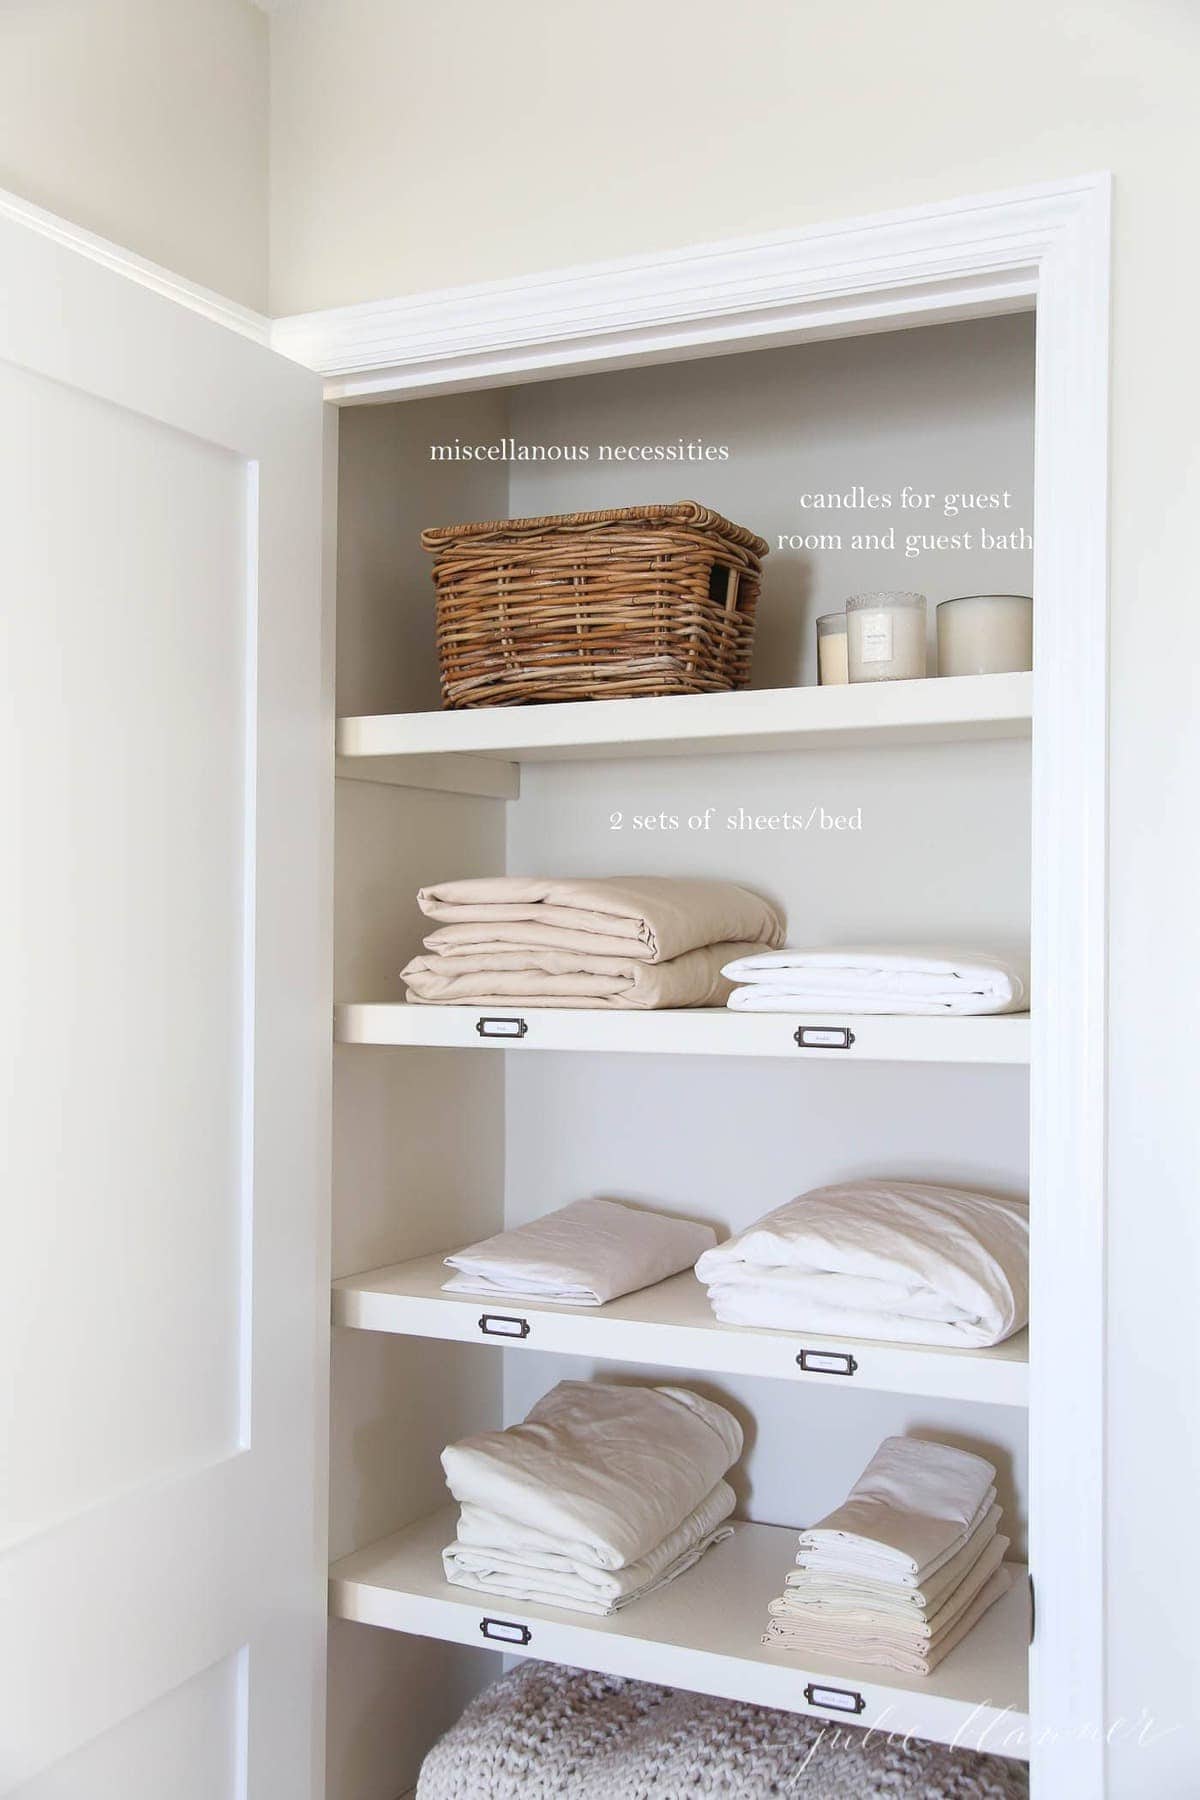 A linen closet stacked with sheets, baskets, etc, with white text overlay describing the items individually